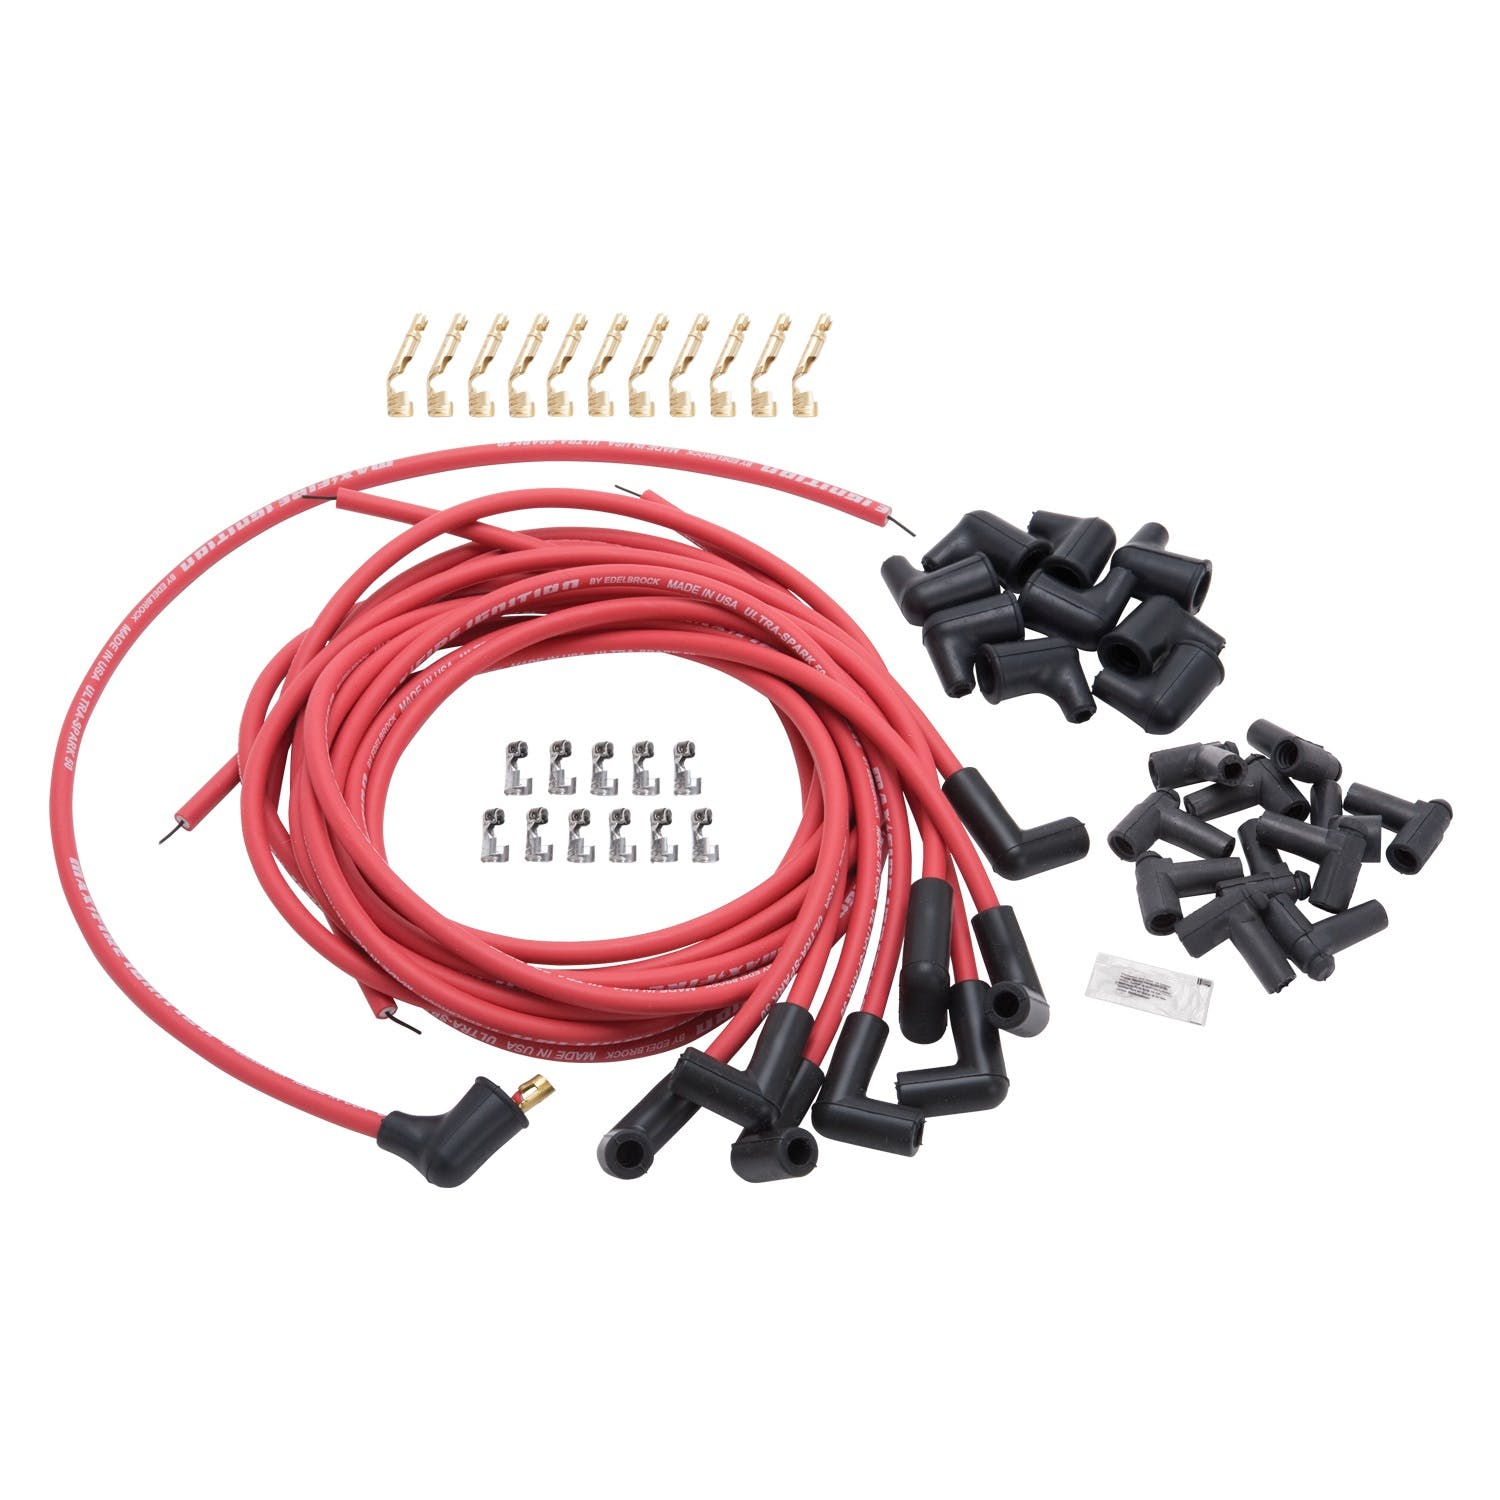 Edelbrock 22711 SPARK PLUG WIRE SET UNIVERSAL 90 DEG BOOTS 50 ohm 8.65mm RED WIRE (SET OF 9)